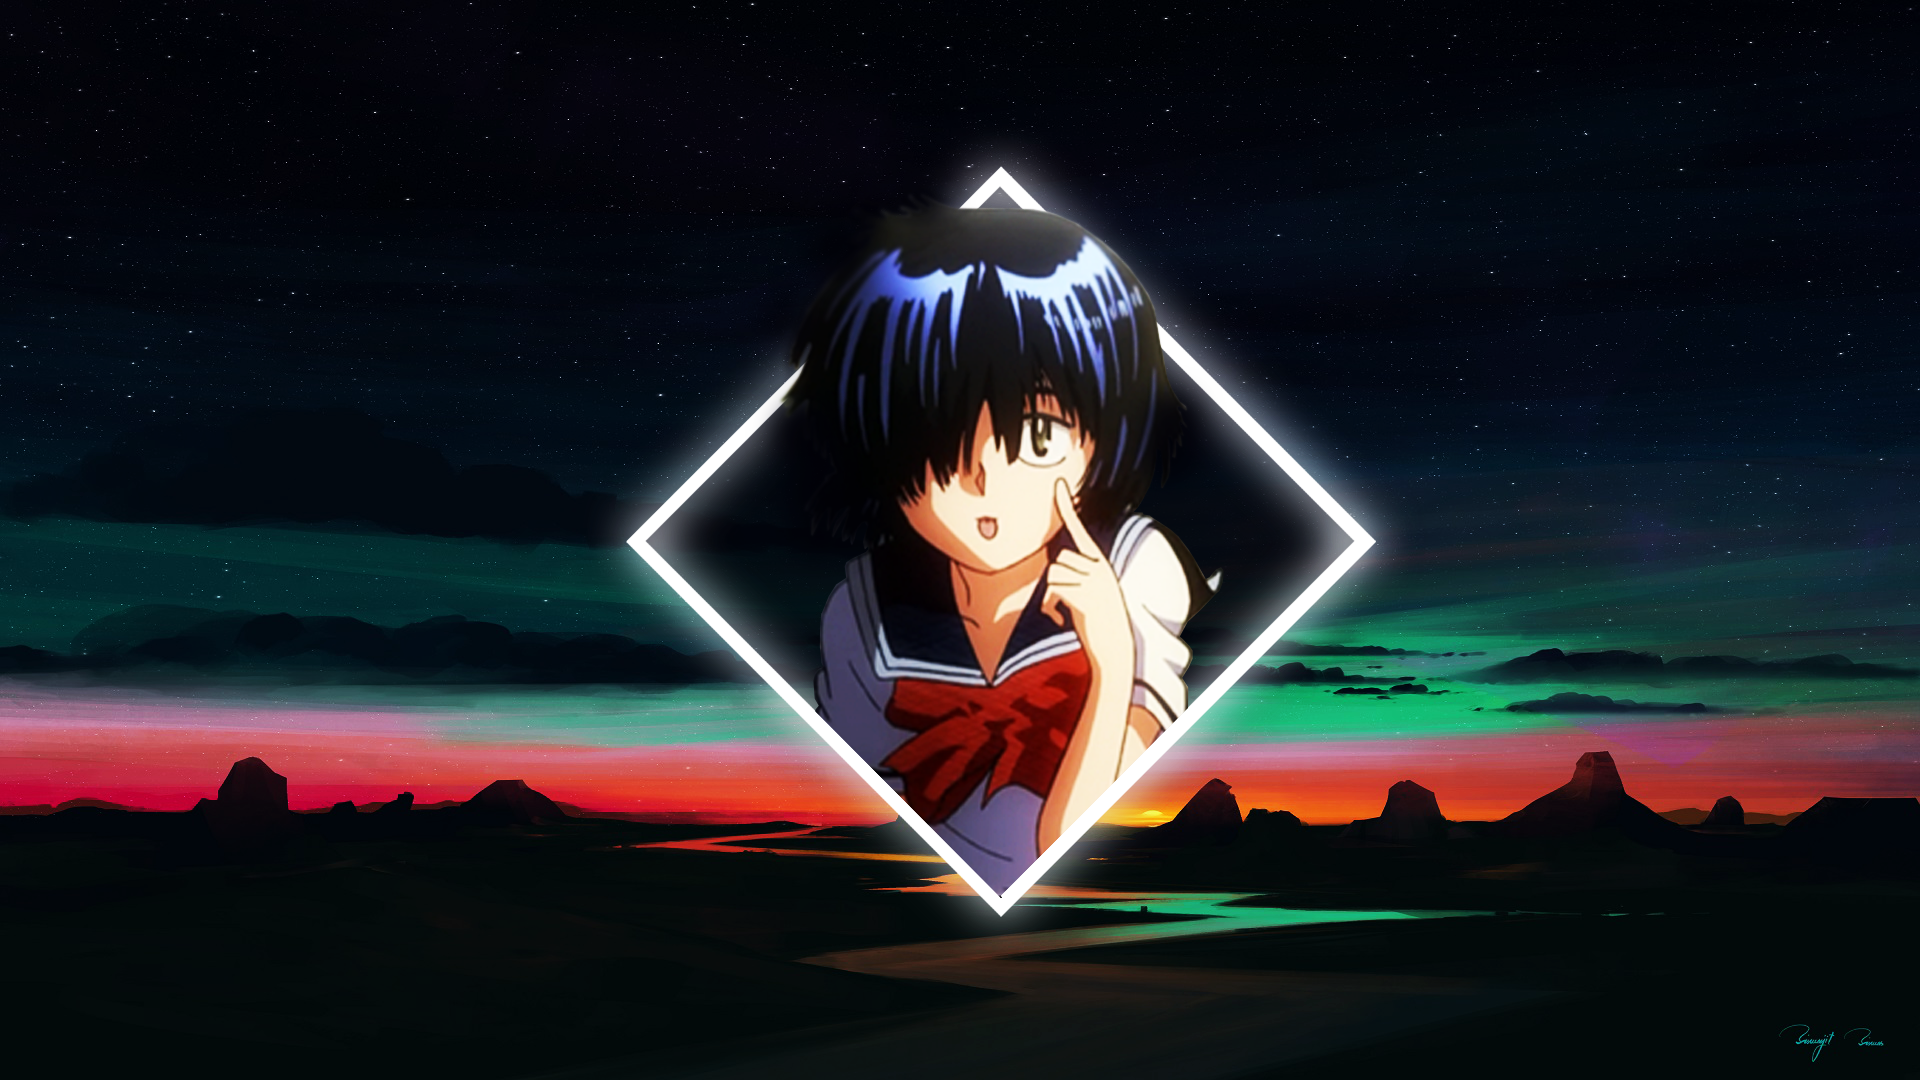 Mikoto Urabe from Mysterious Girlfriend X